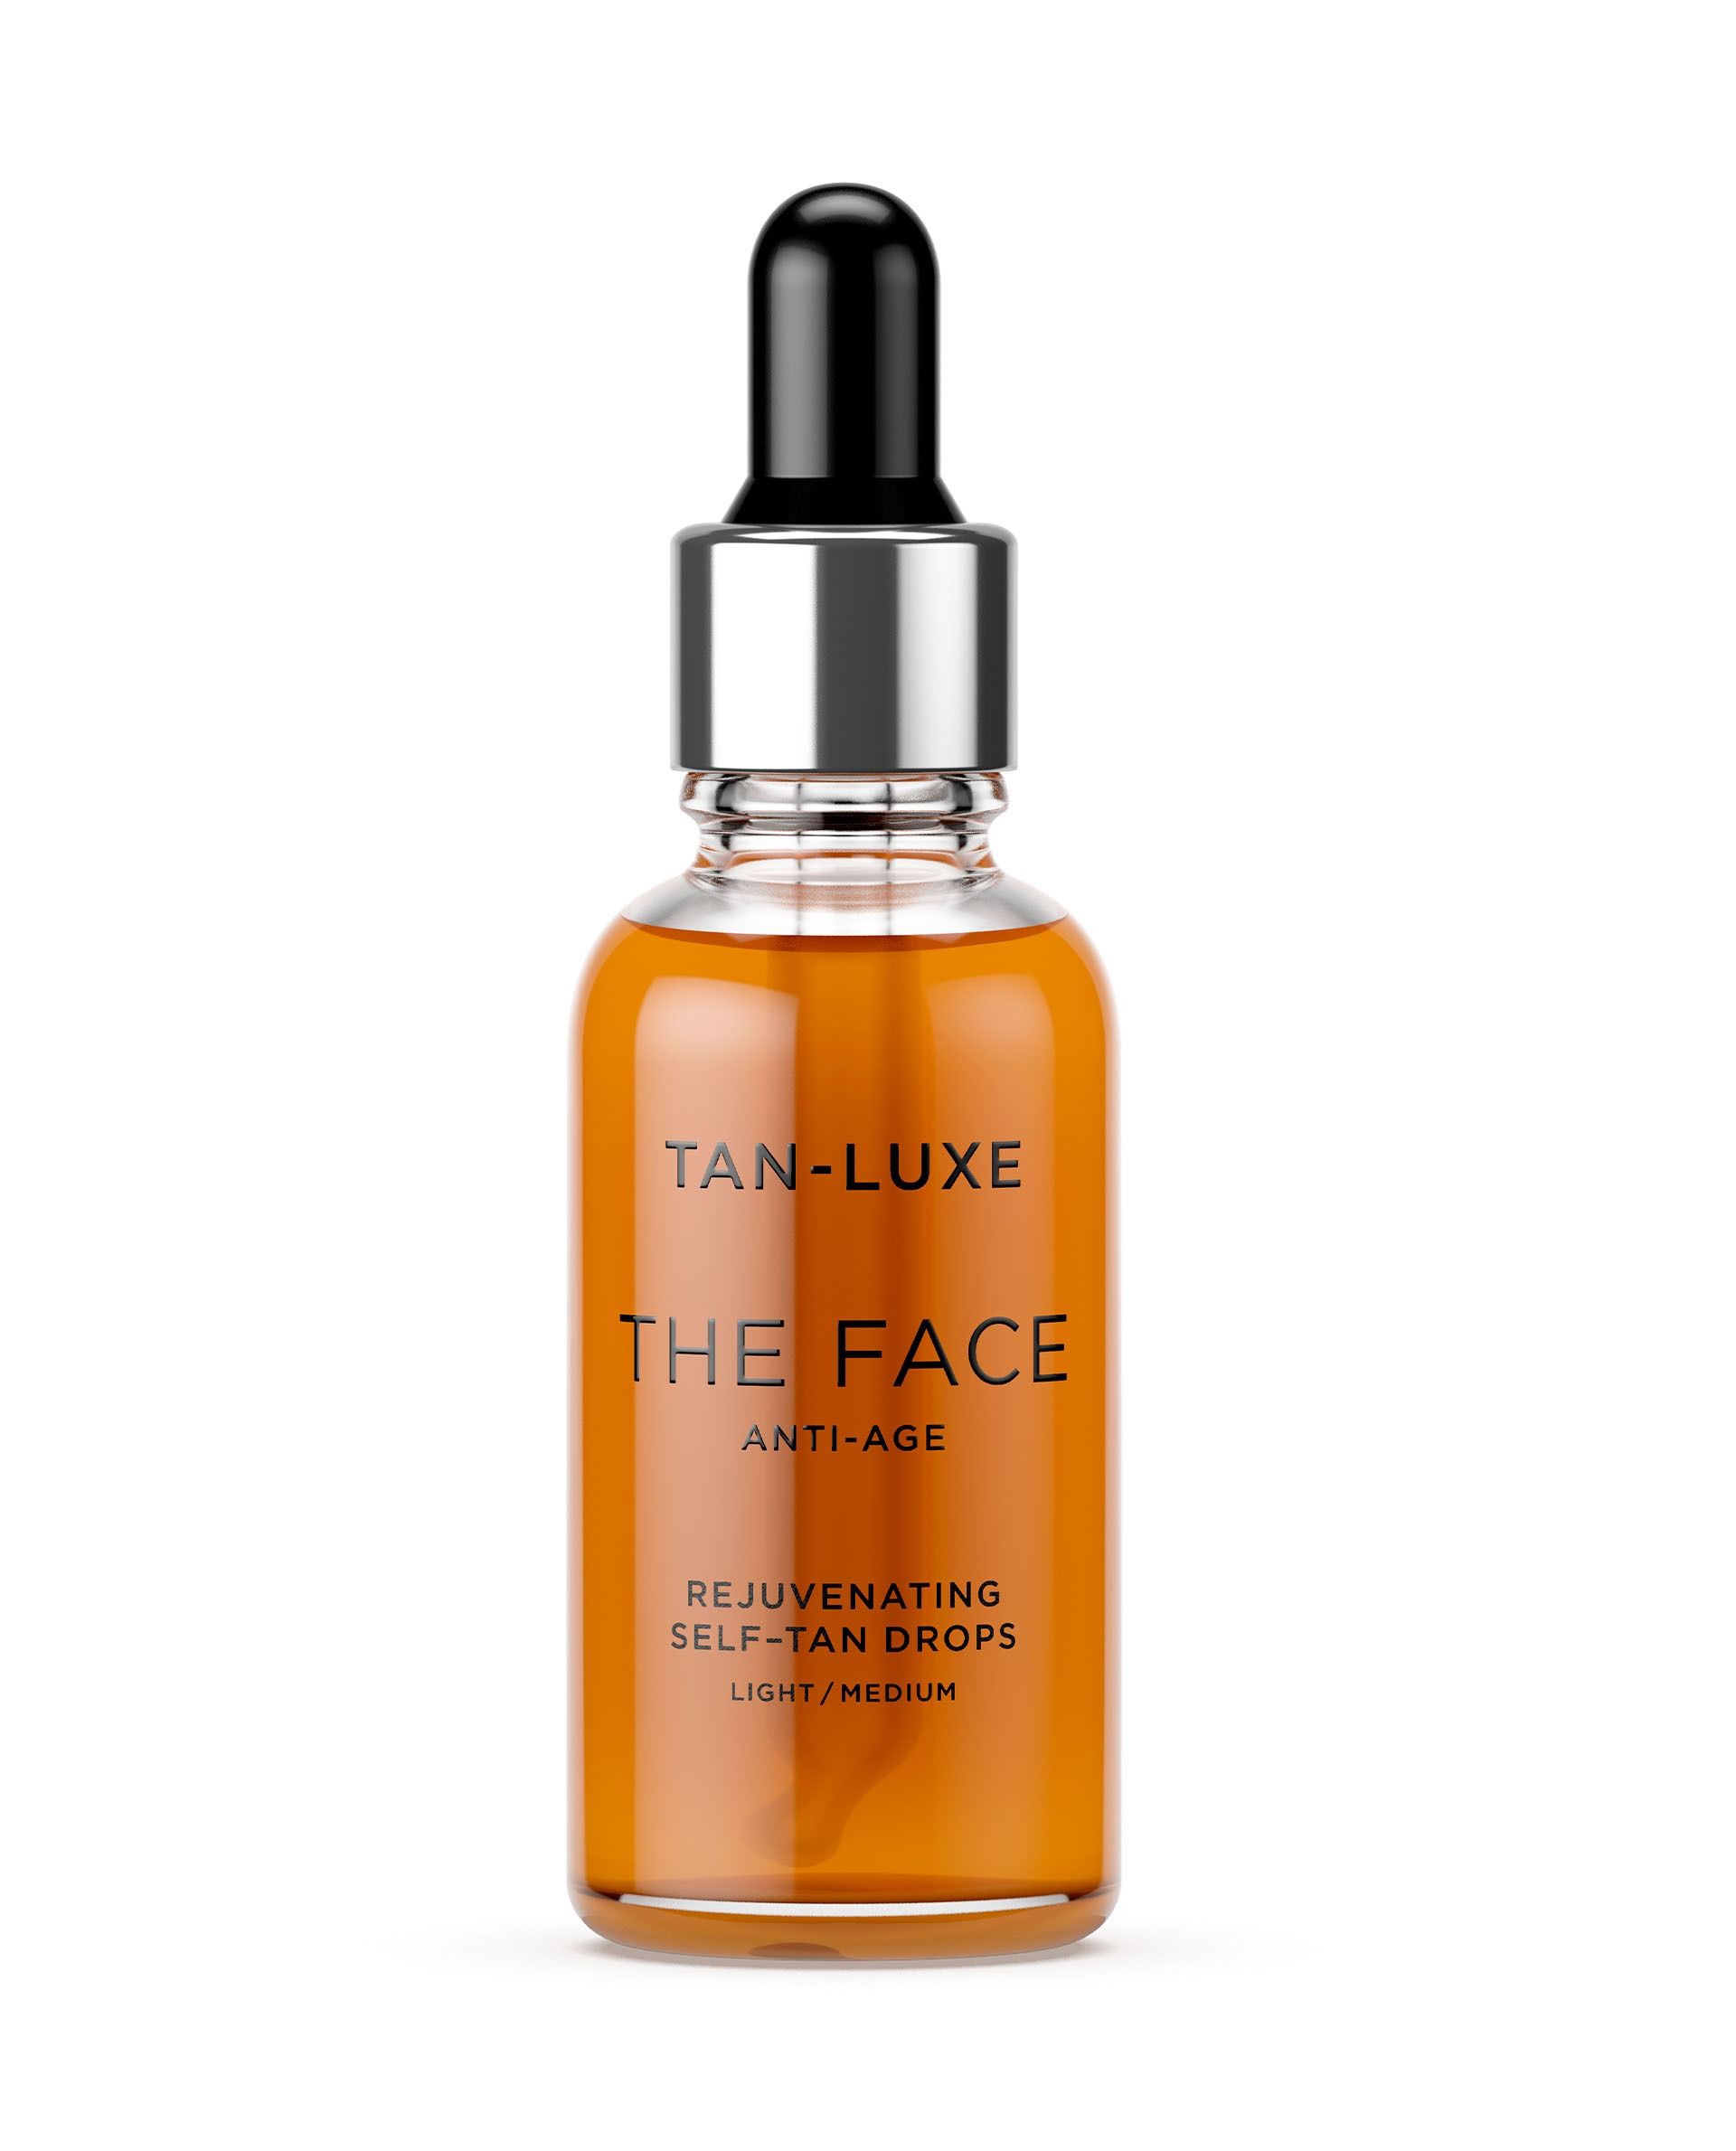 The Face: Anti-Age | Tan Luxe